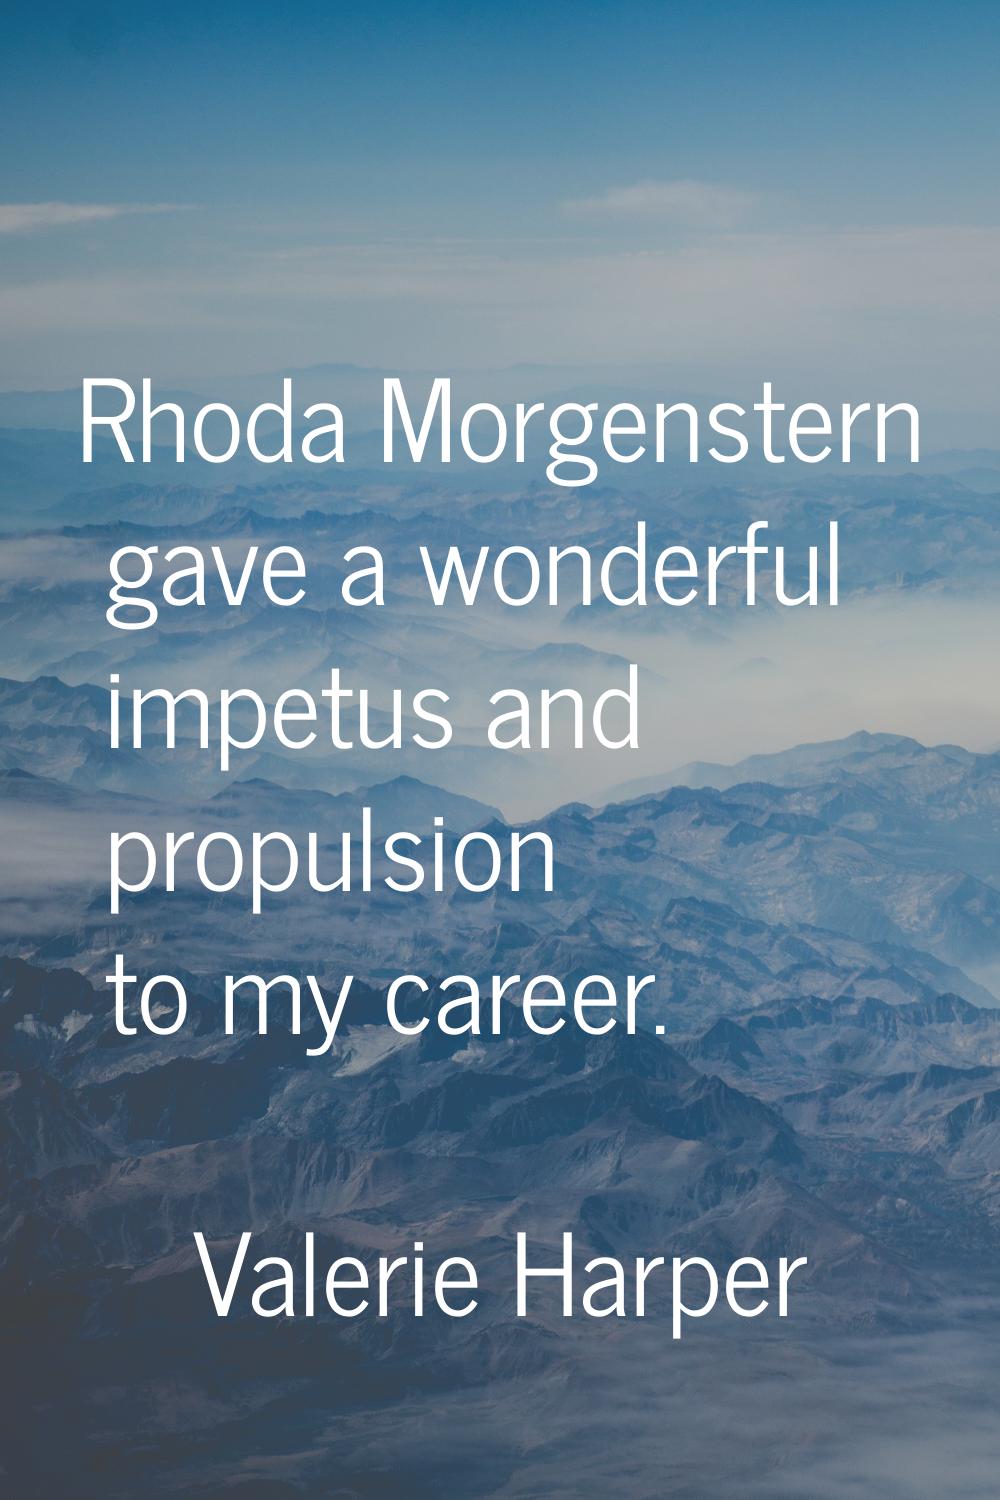 Rhoda Morgenstern gave a wonderful impetus and propulsion to my career.